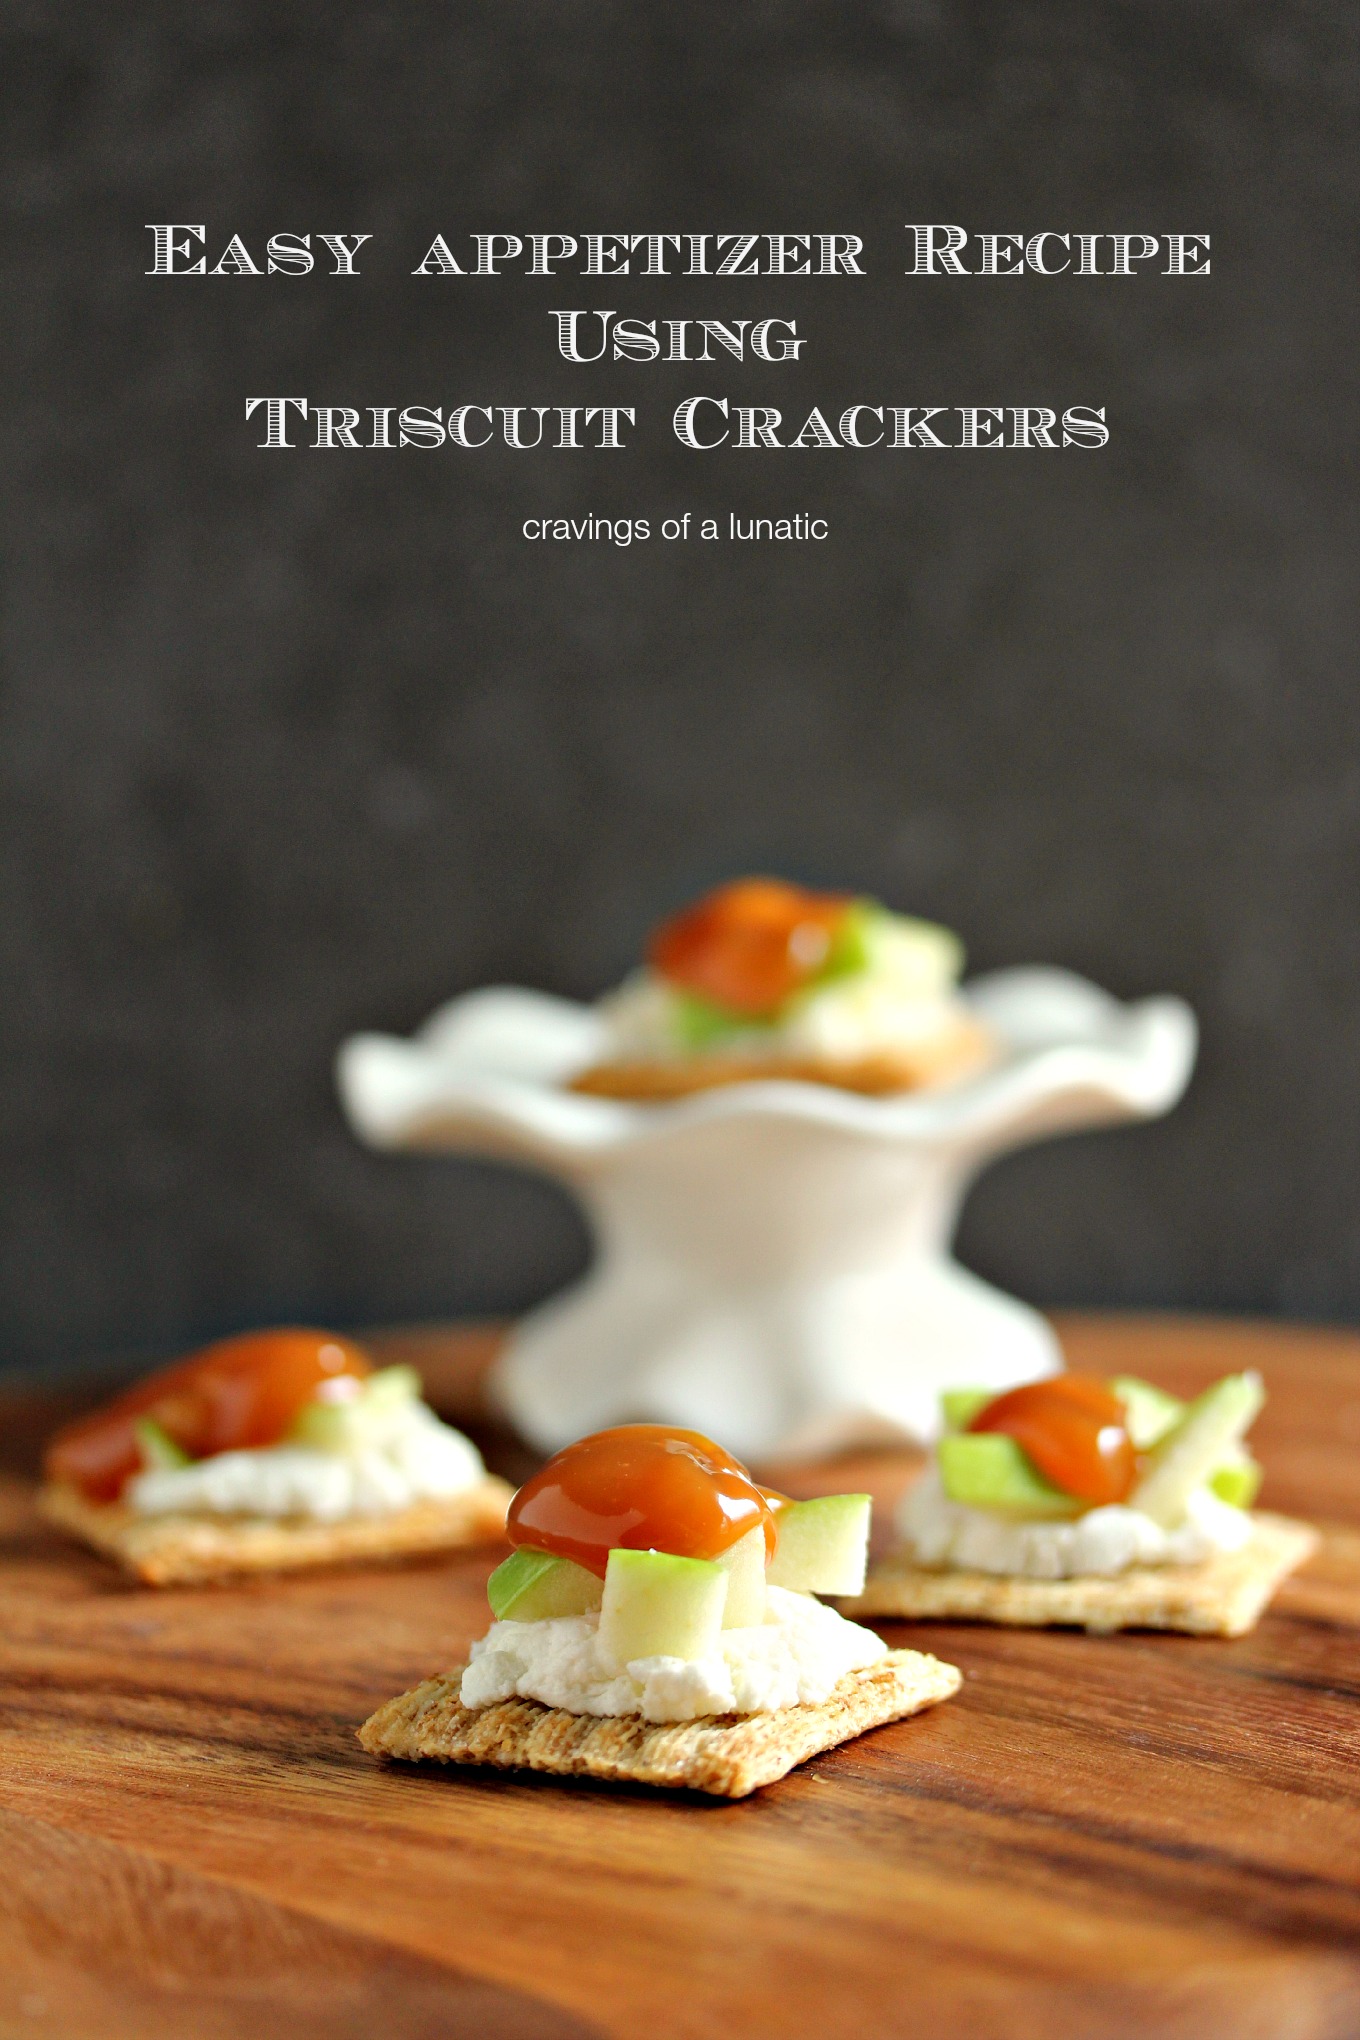 Caramel Apple Triscuit Bites- These Caramel Apple Triscuit Bites are the perfect party food. Top Triscuit Crackers with Ricotta, Apples and Caramel for sweet party bites! Get the recipe on cravingsofalunatic.com